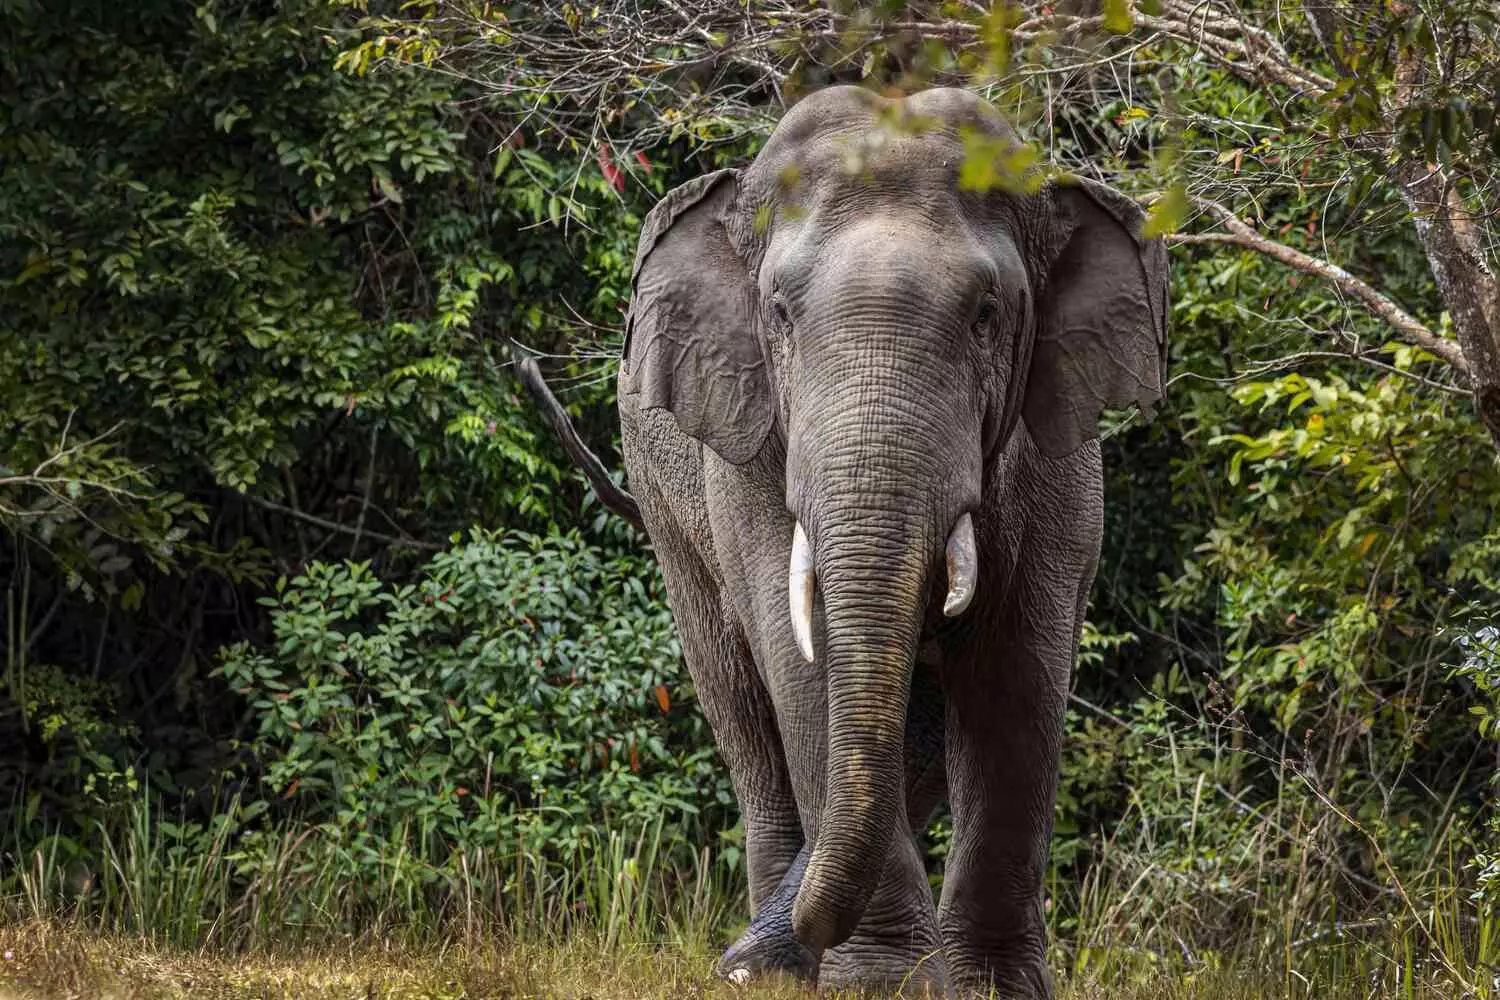 Wild elephant buried on private property in Kerala, Tusk missing